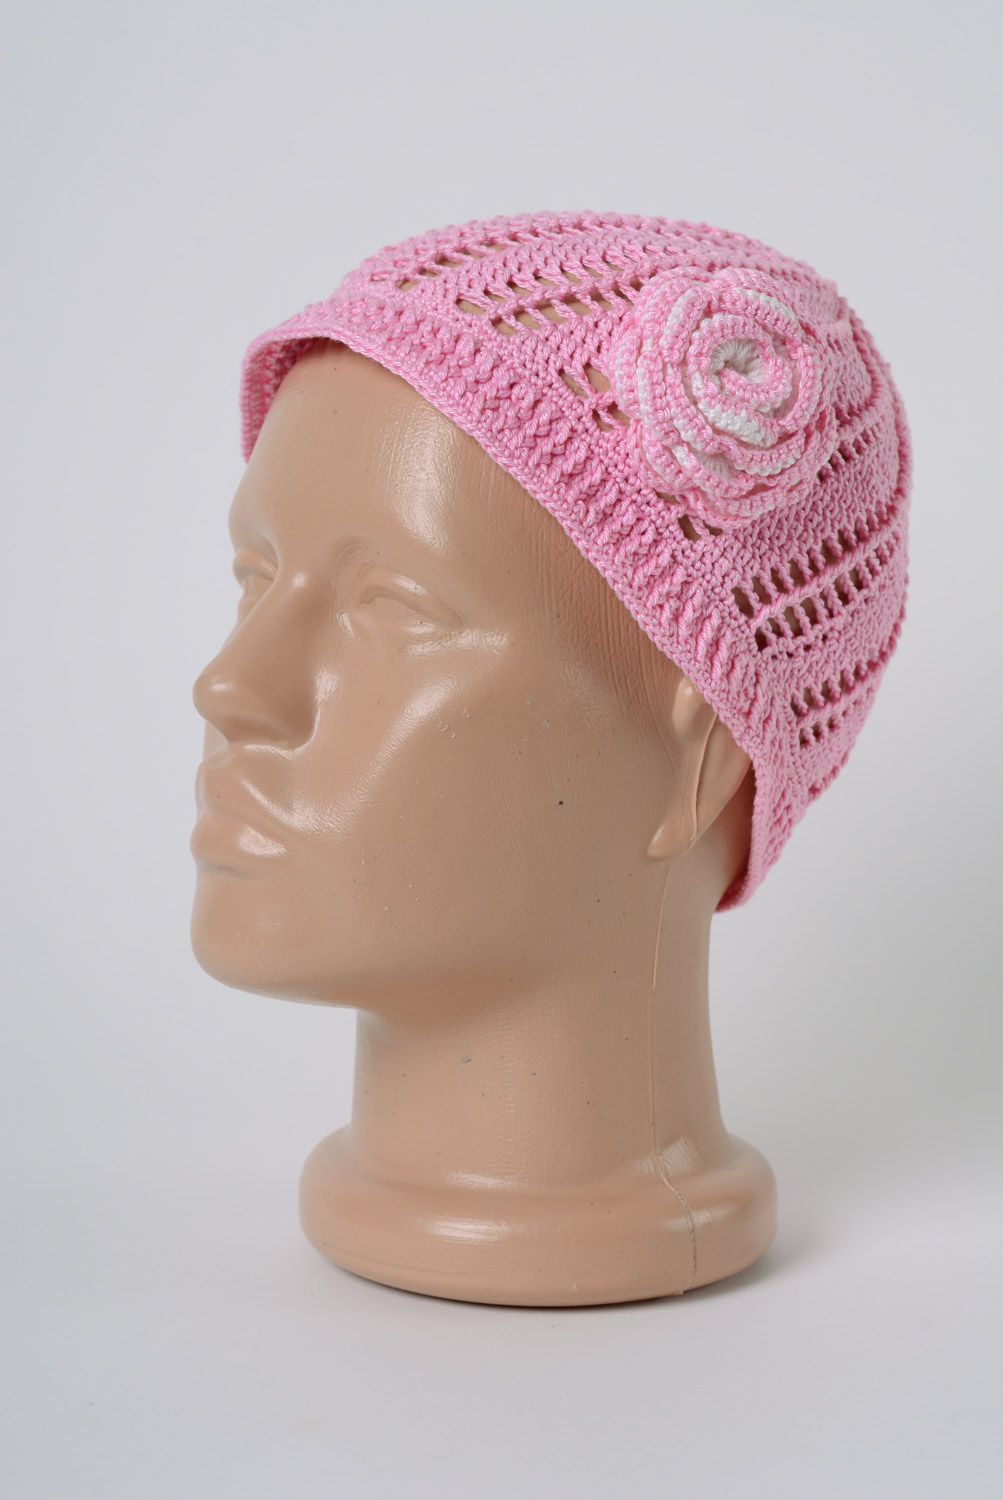 Handmade lacy pink hat crocheted of cotton threads with flower for girl photo 1